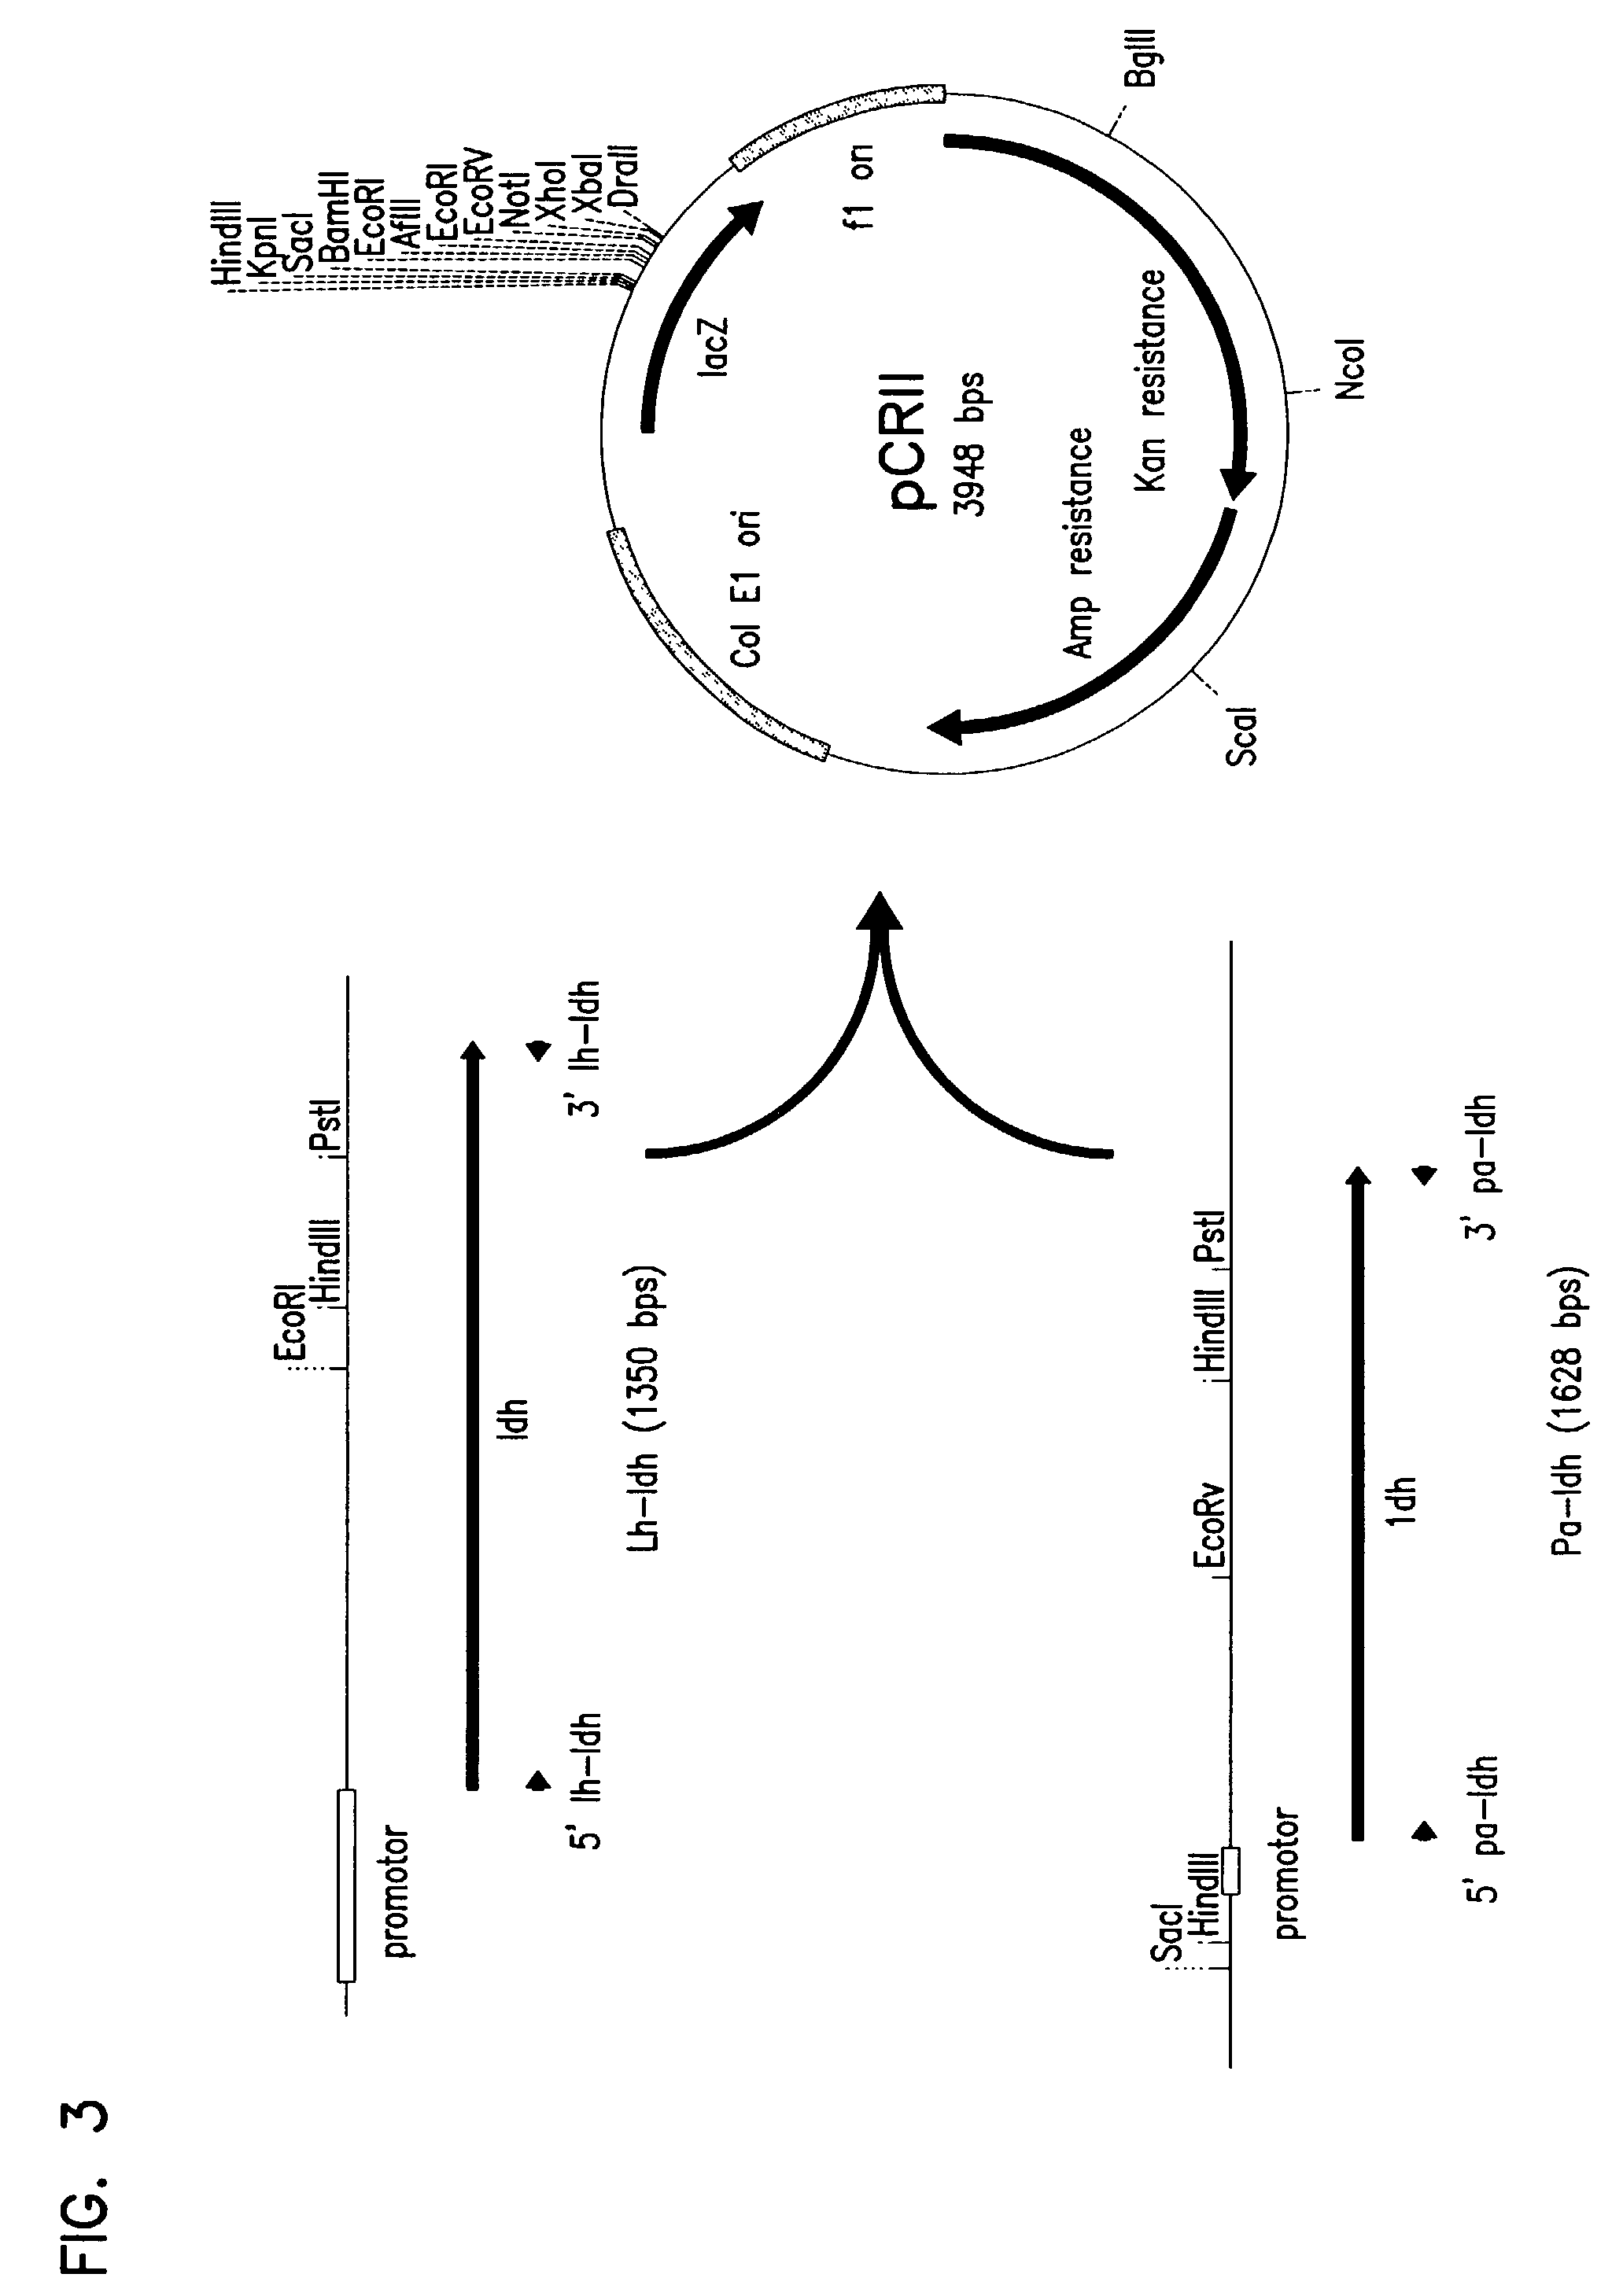 Methods for the synthesis of lactic acid using crabtree-negative yeast transformed with the lactate dehydrogenase gene